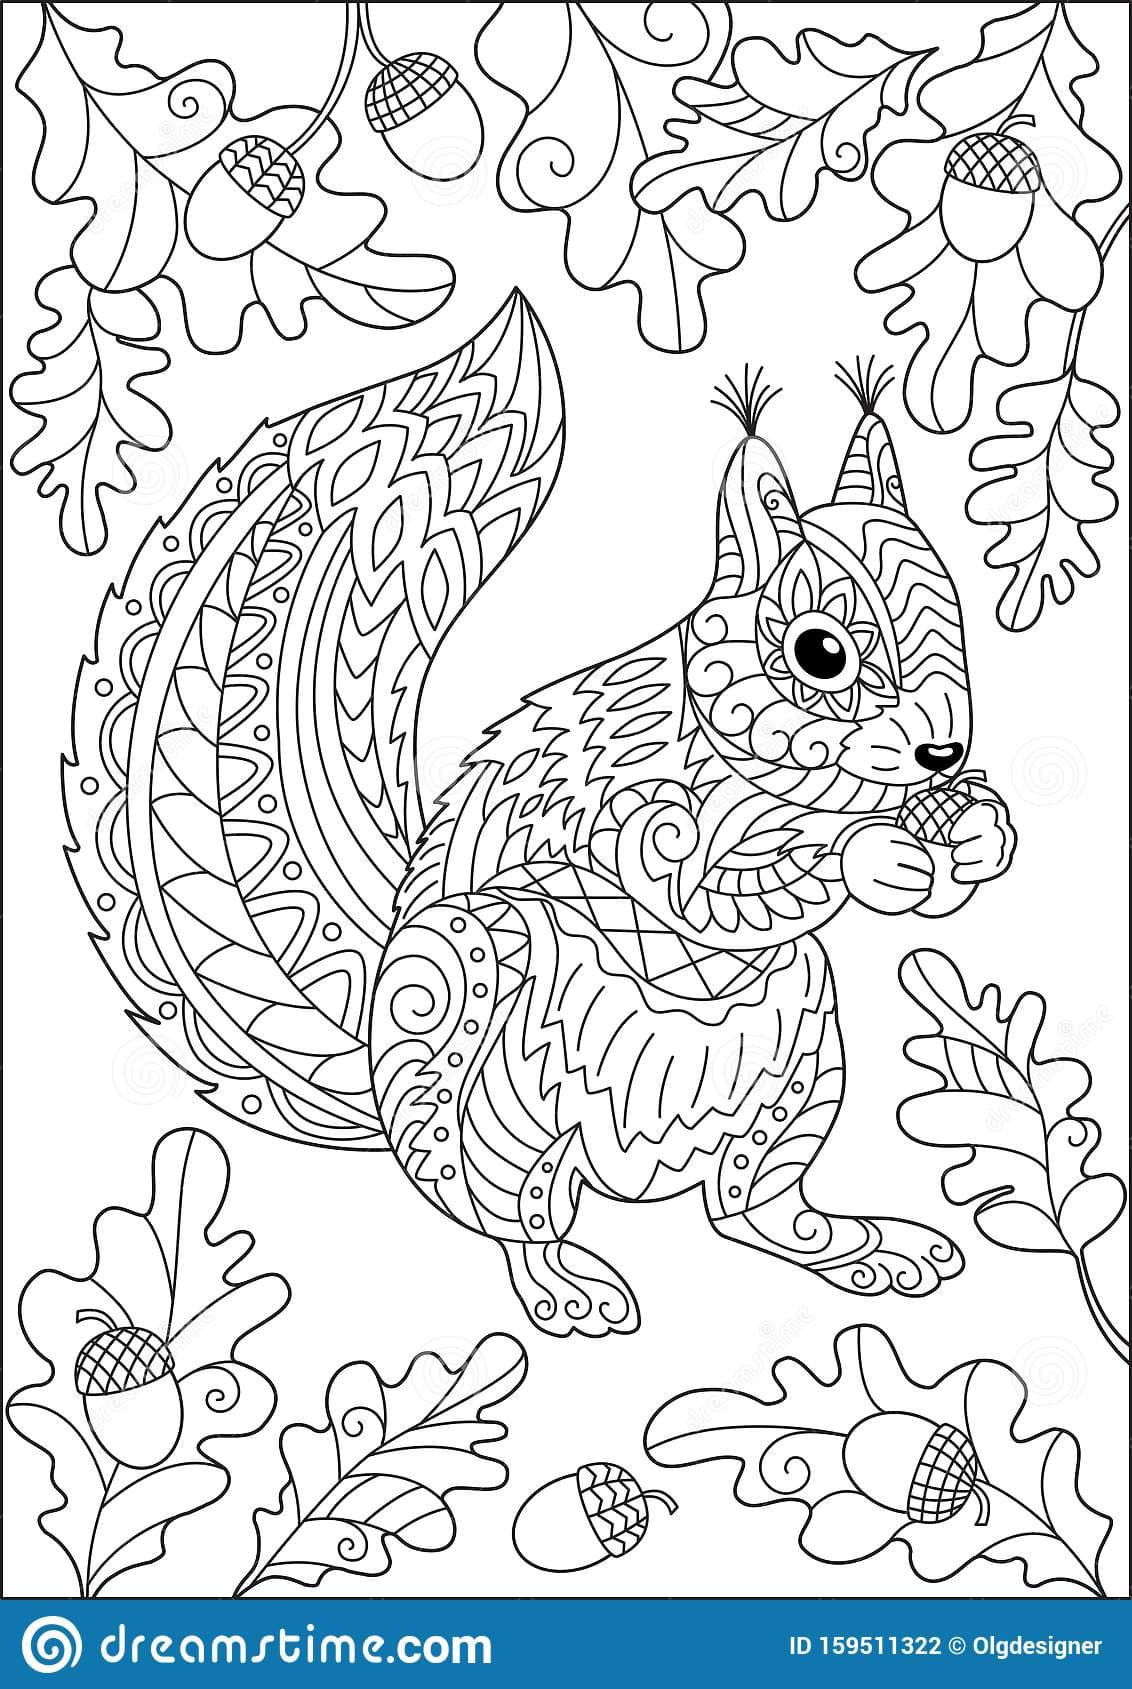 Squirrel And Autumn Image Coloring Page